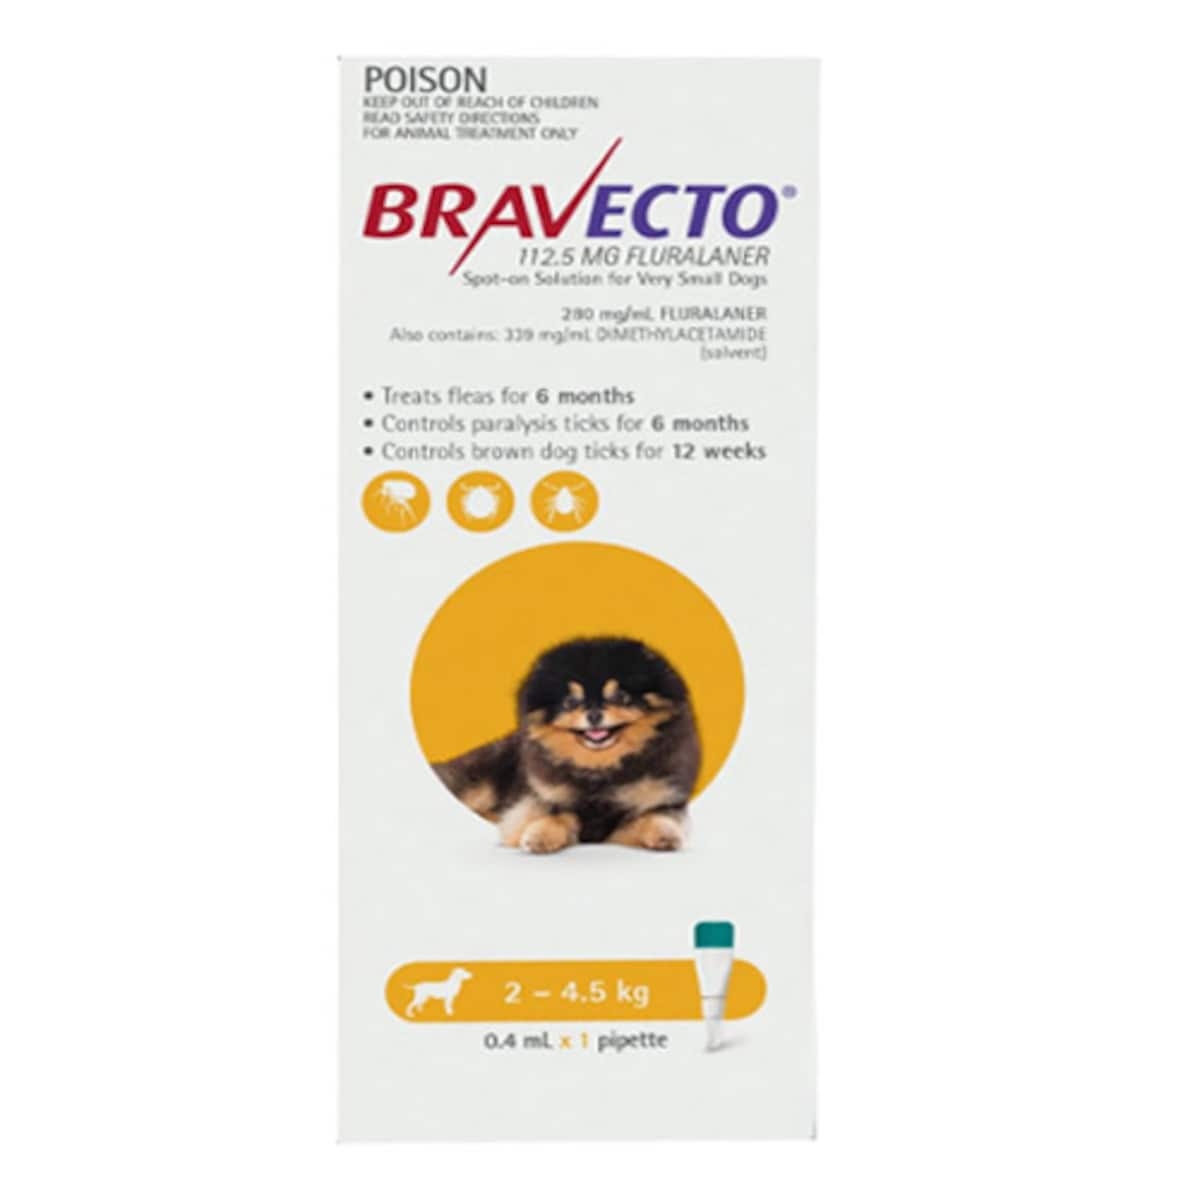 Bravecto Spot-On For Very Small Dog 2 - 4.5Kg 1 Pack (Yellow)